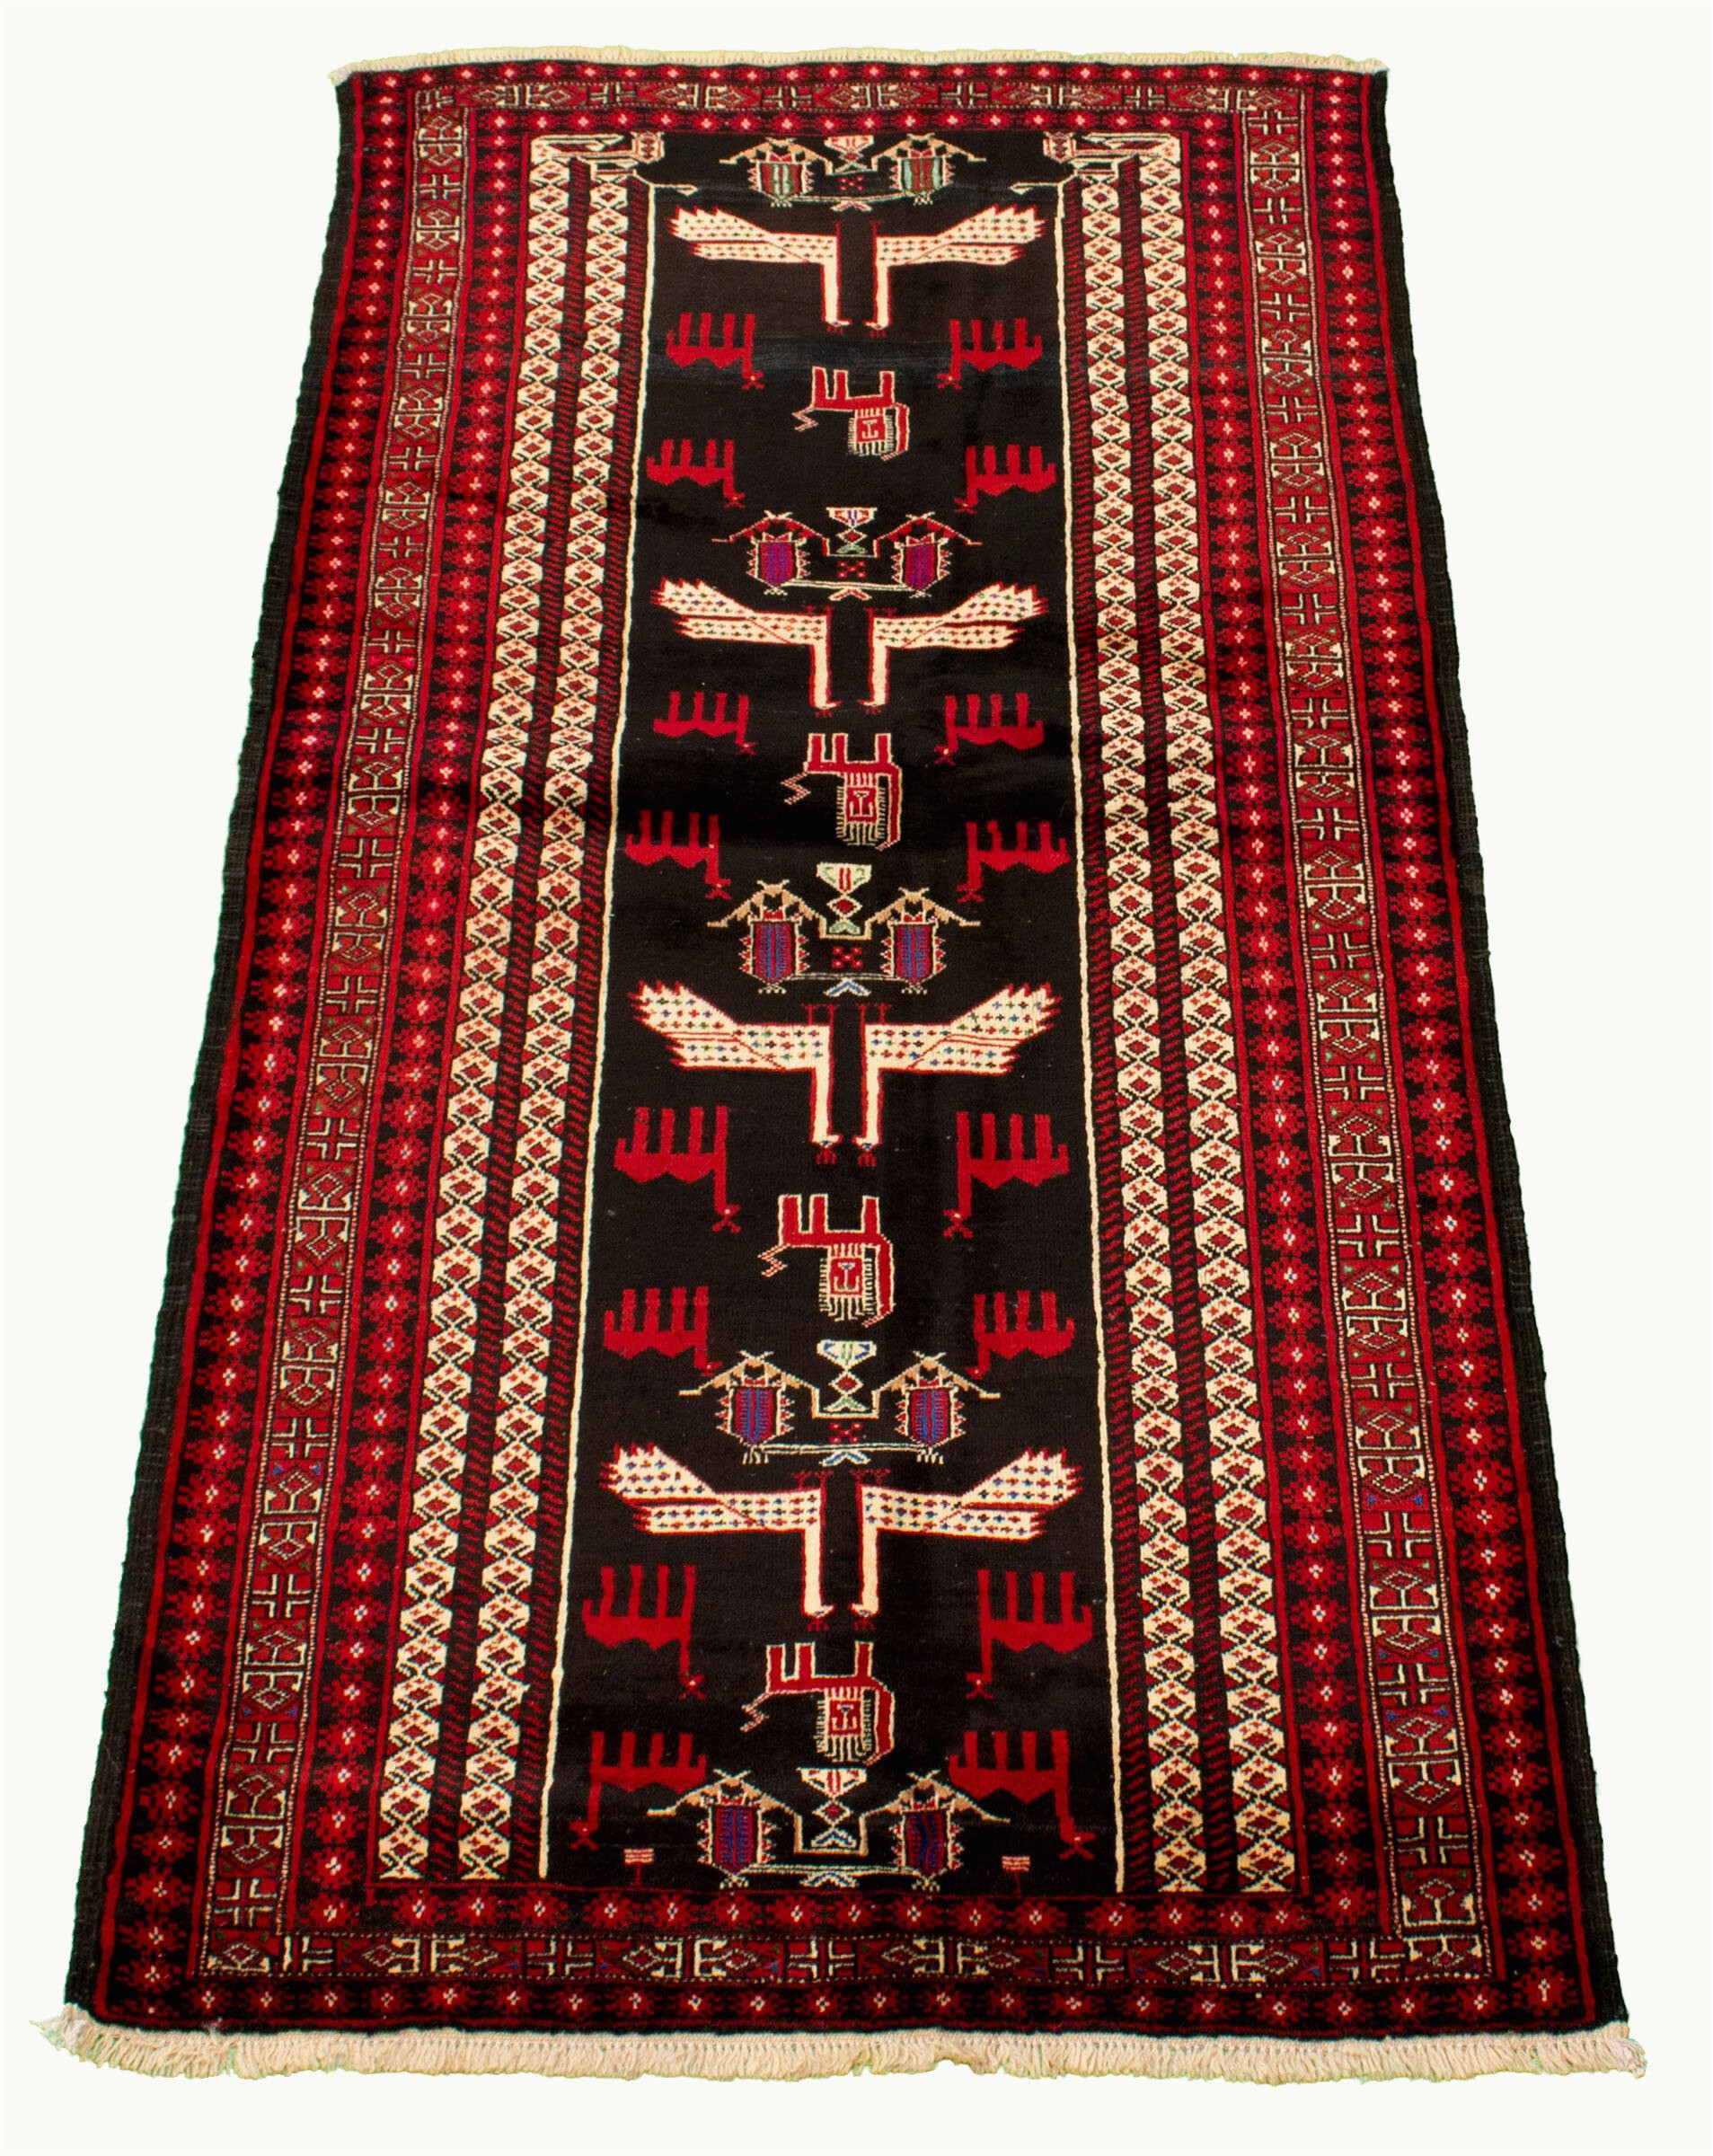 36 X 72 area Rugs E Of A Kind Hand Knotted 1980s Rizbaft Black Red 3 6" X 7 2" Runner Wool area Rug